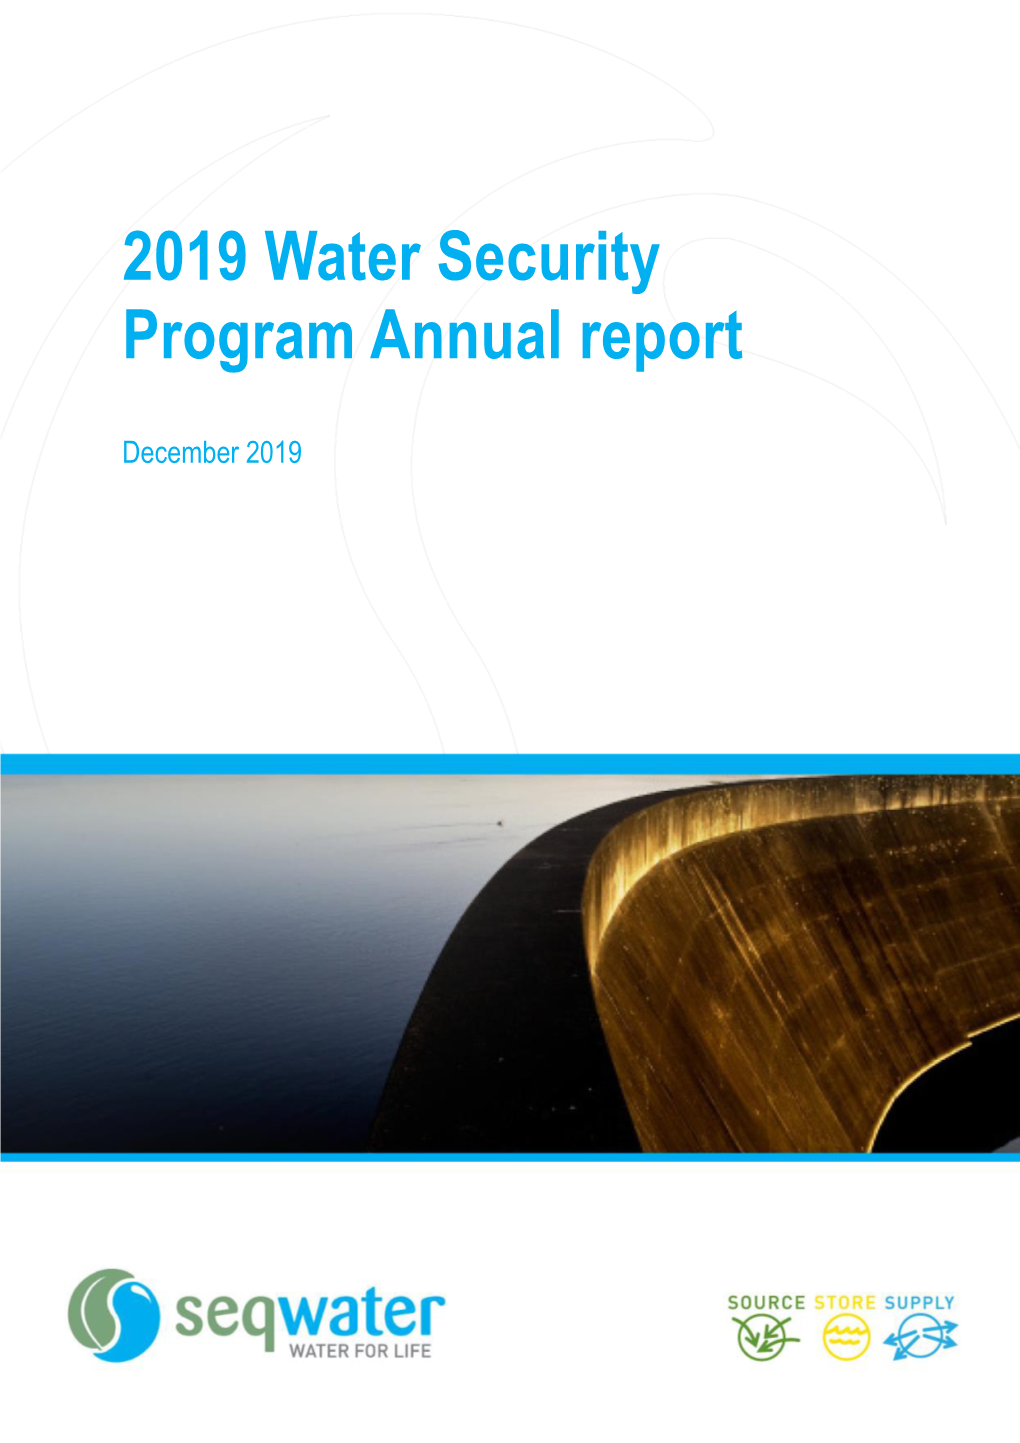 2019 Water Security Program Annual Report